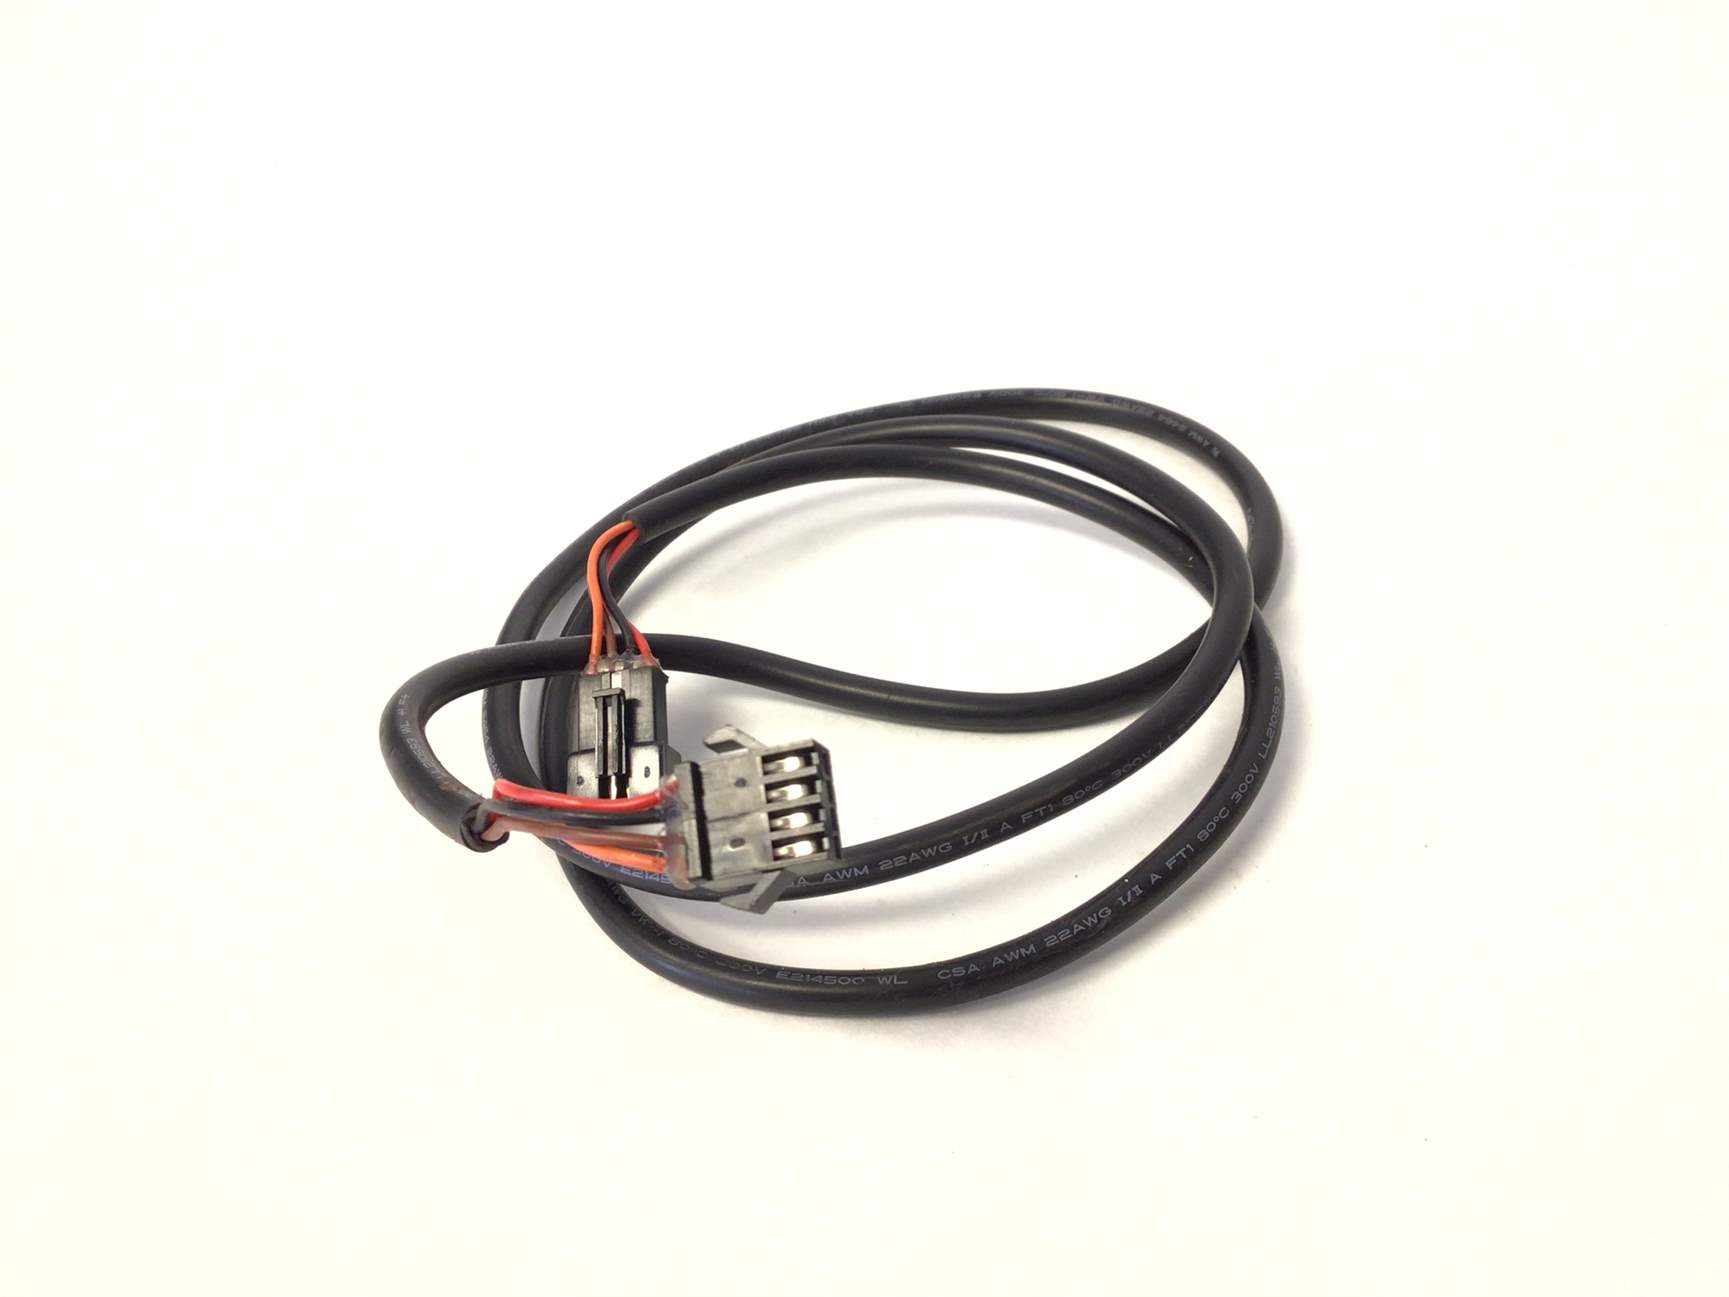 Middle Interconnect Wire Harness (Used)